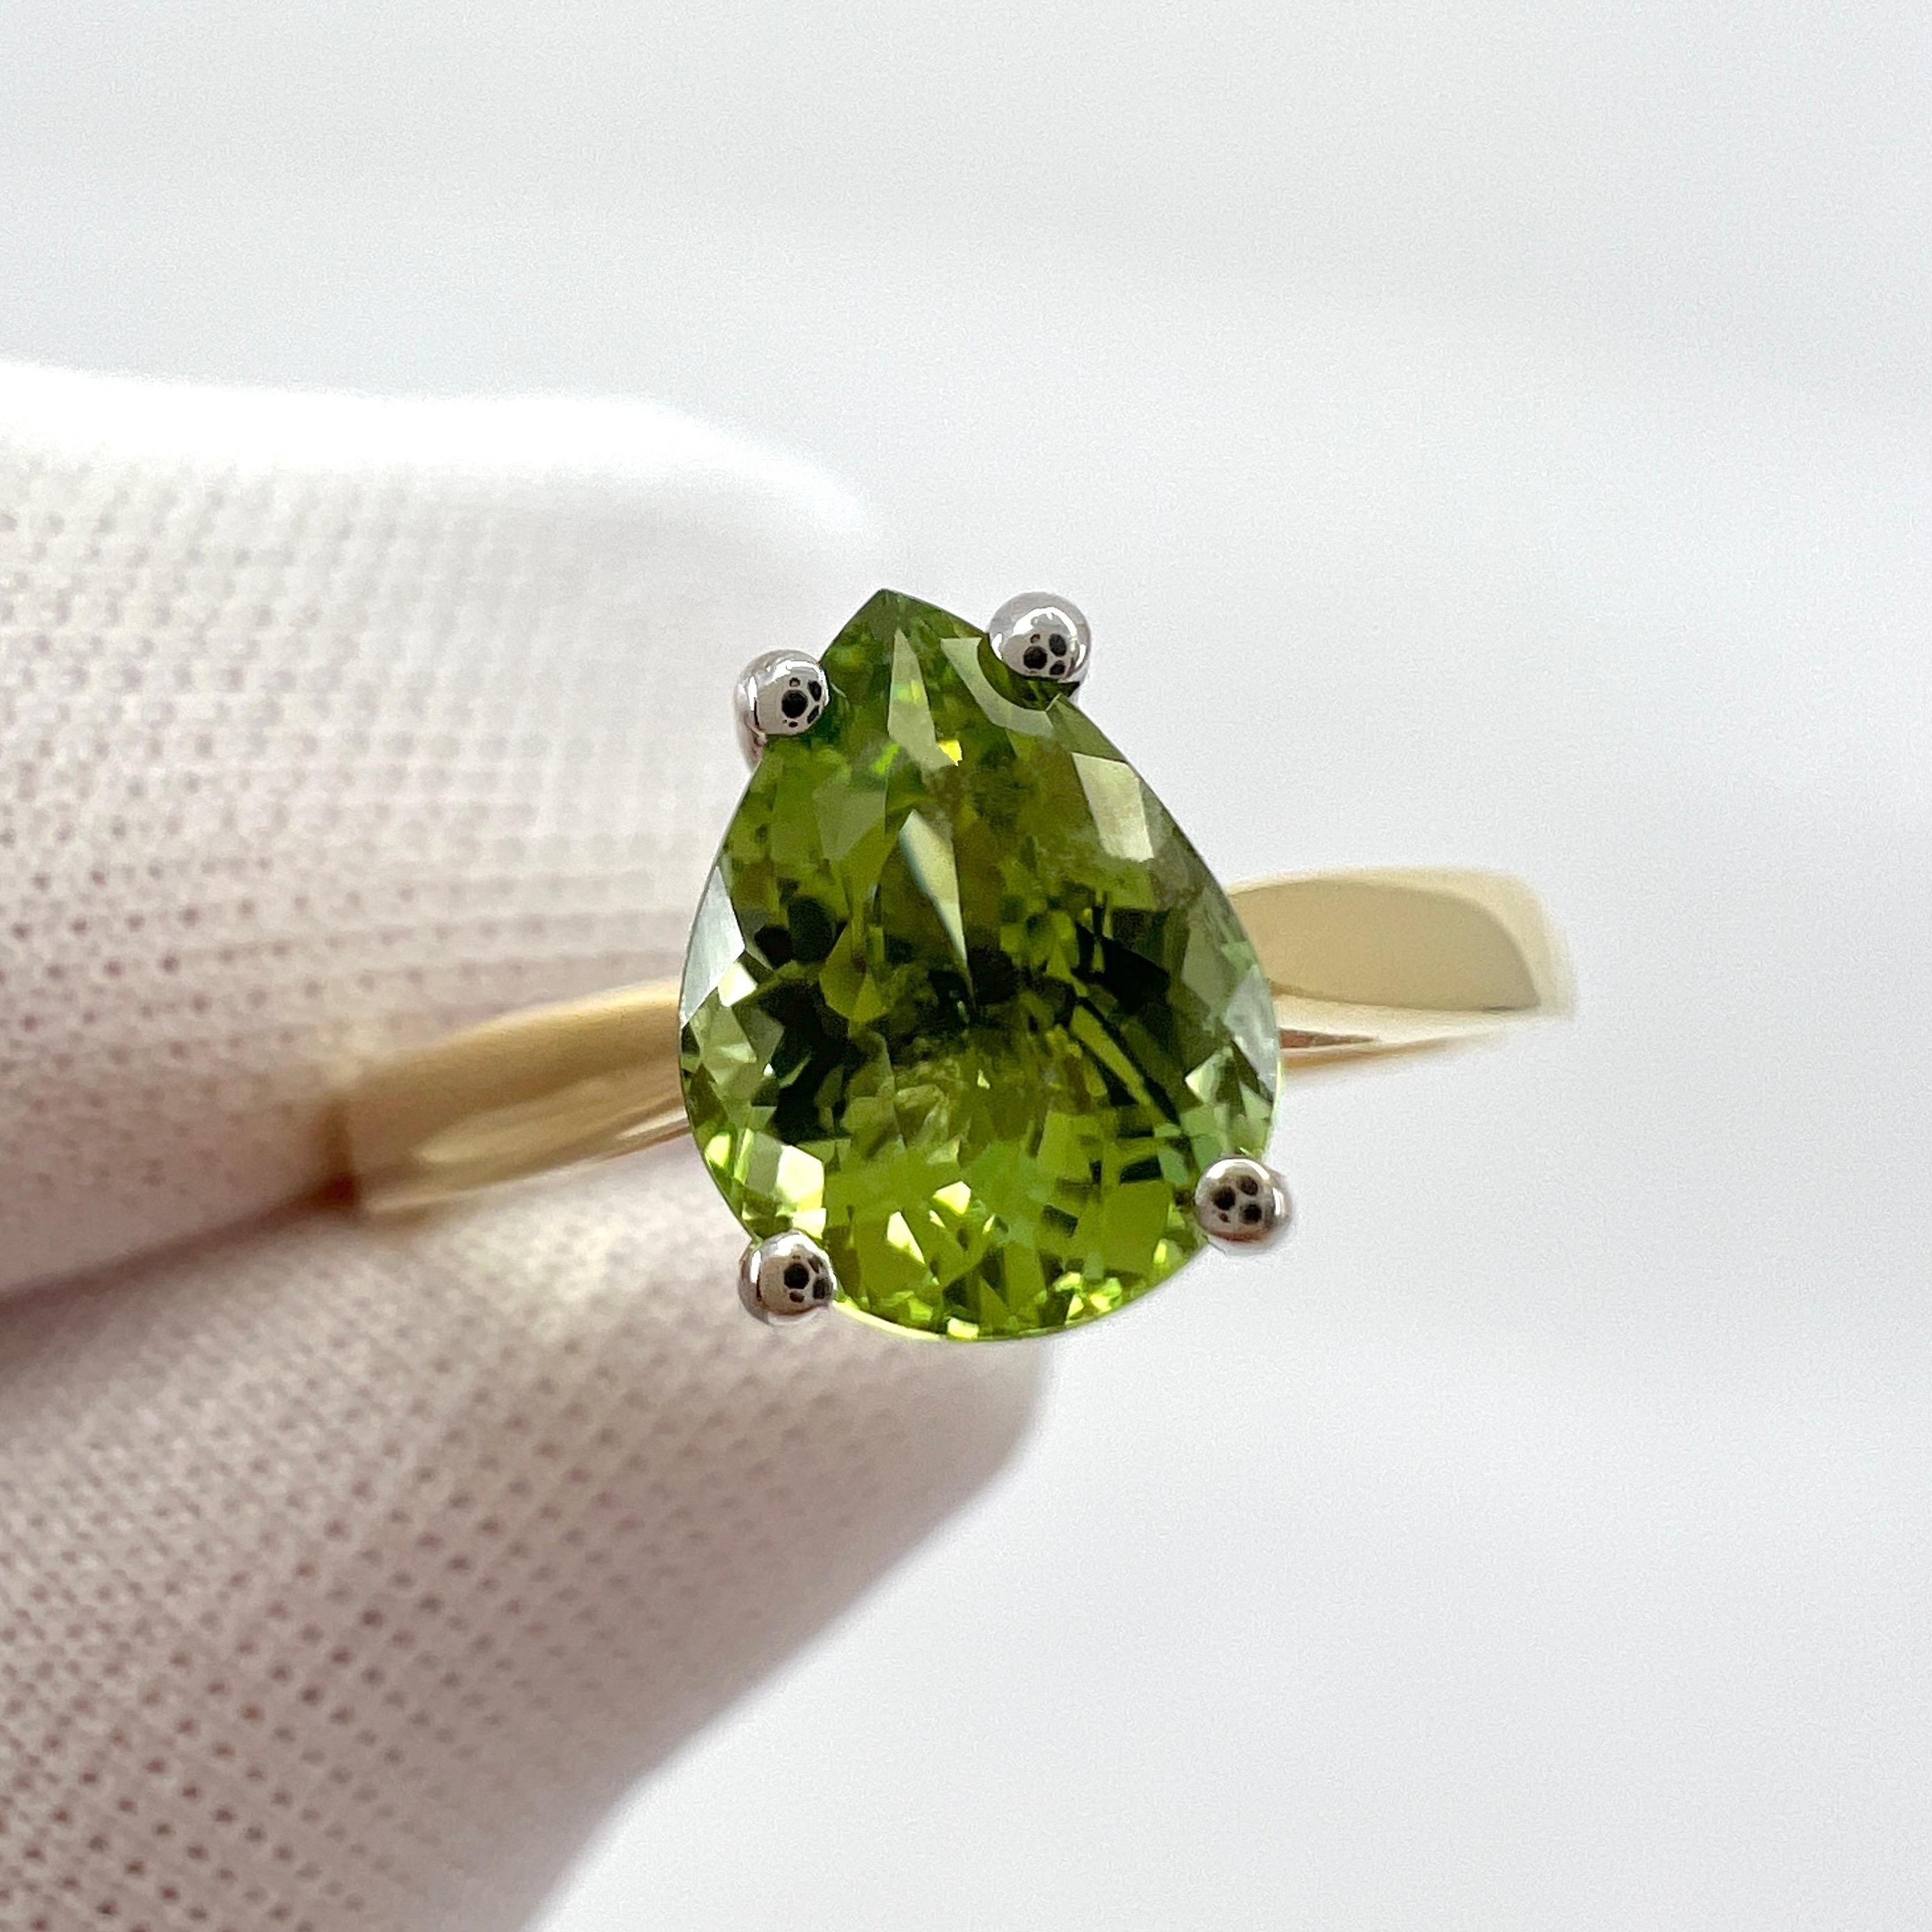 Oval Cut 1.31ct Light Green Tourmaline Pear Cut 18k Yellow And White Gold Solitaire Ring For Sale